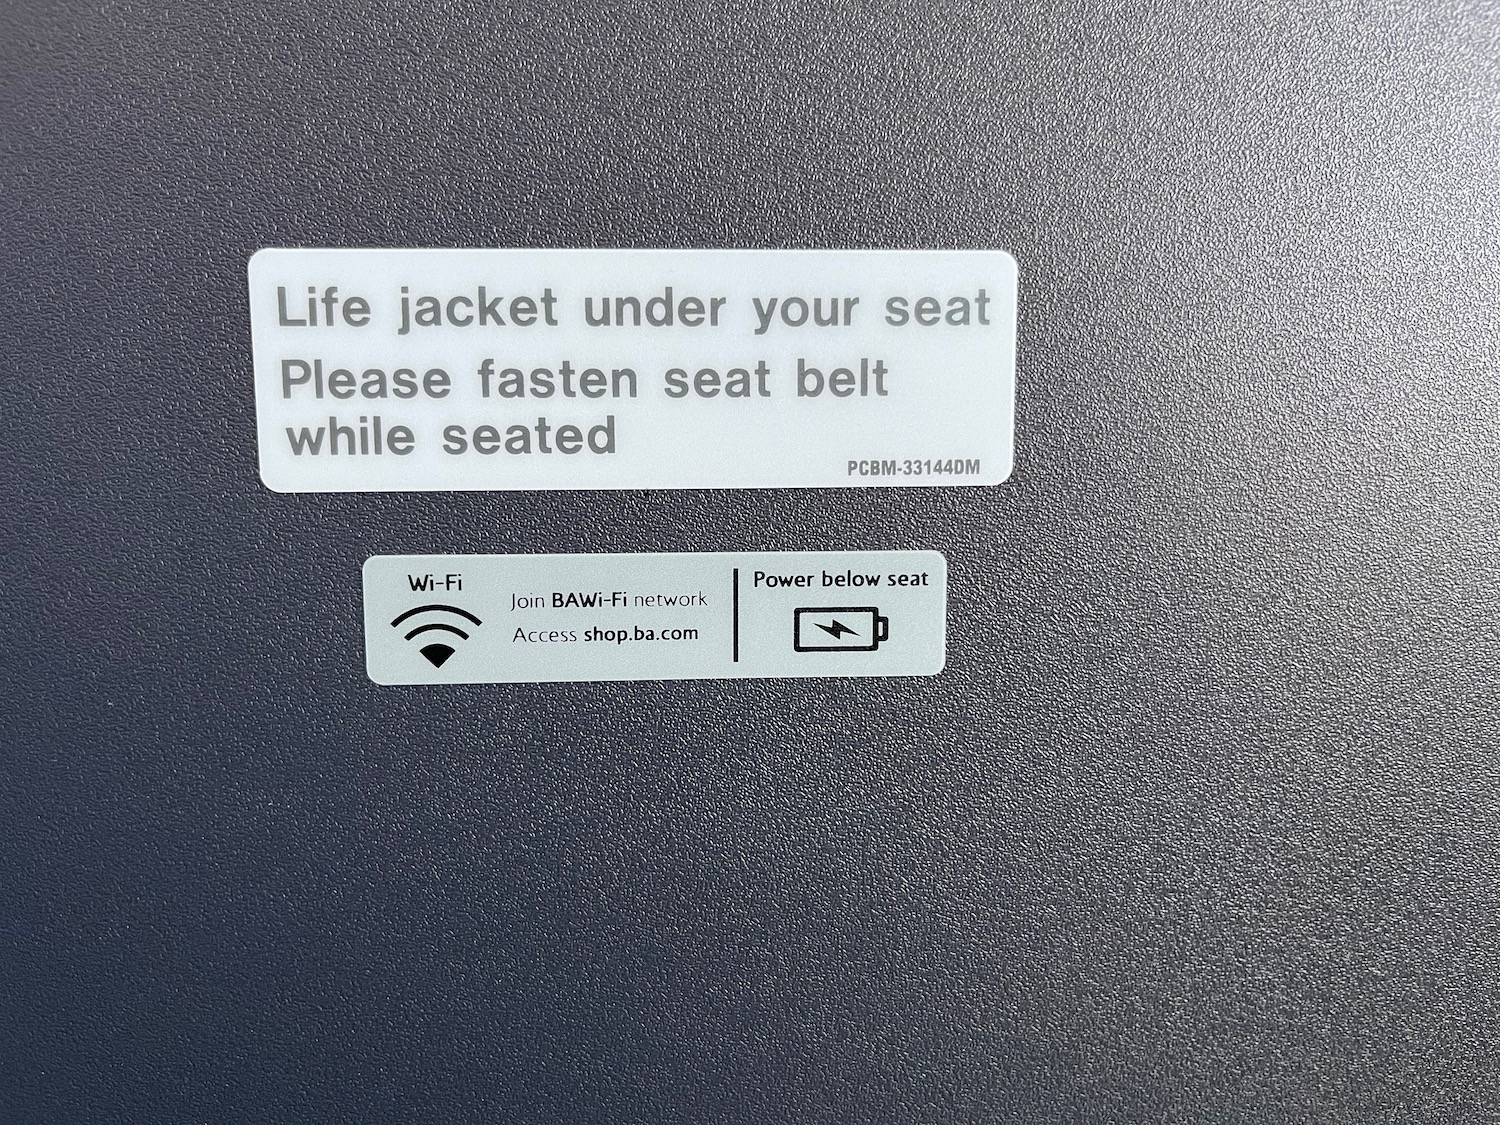 a sign on a seat